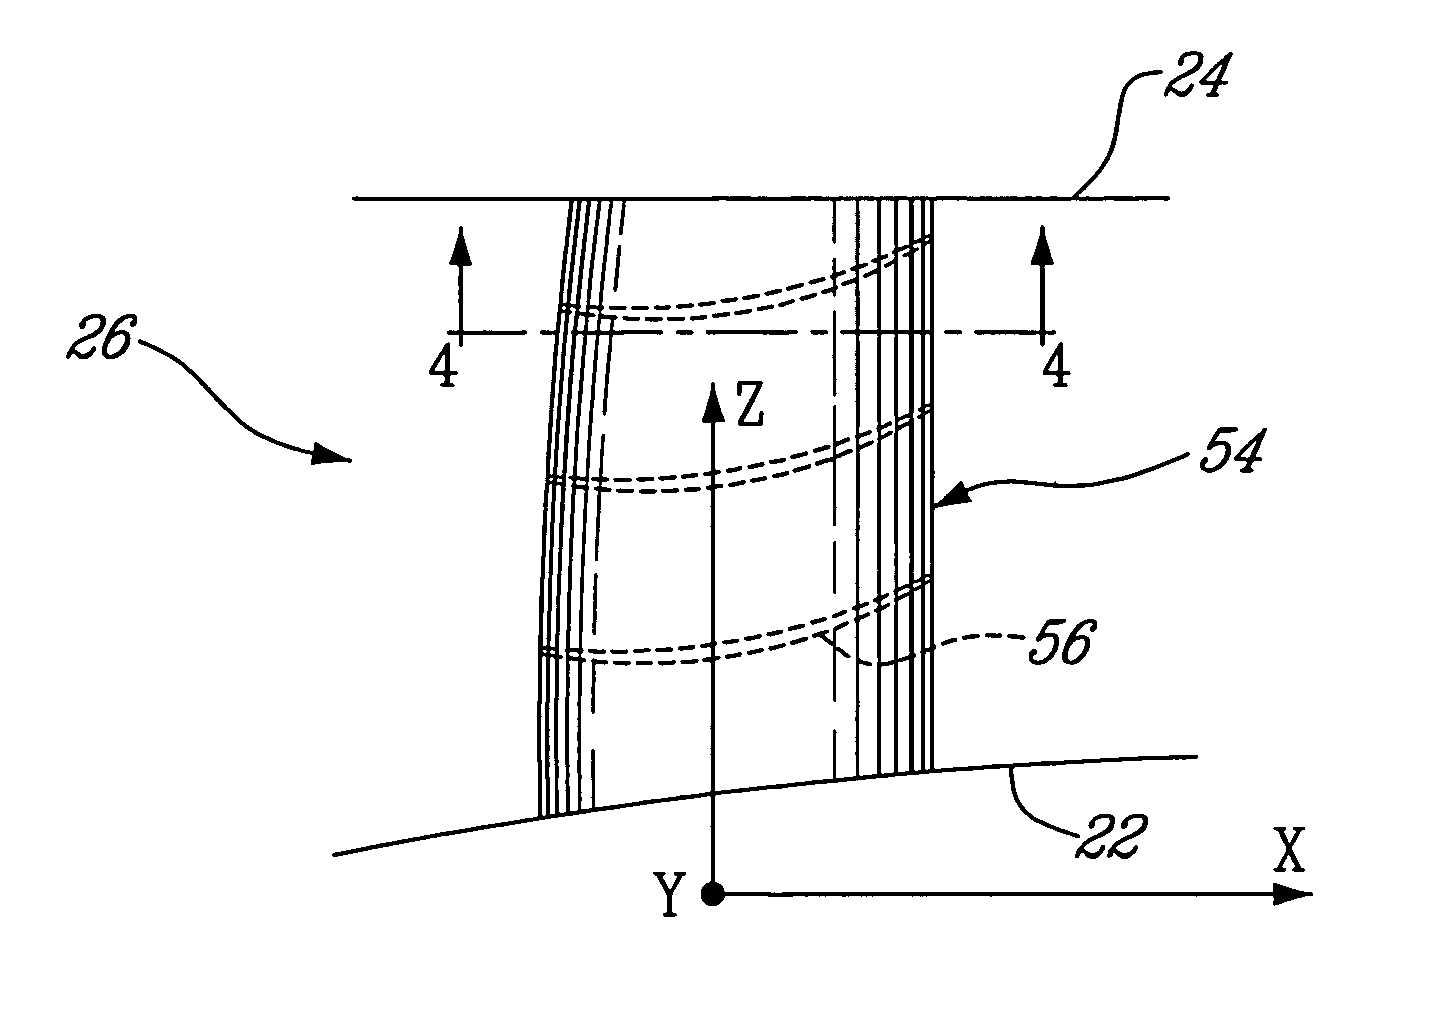 Turbine exhaust strut airfoil and gas path profile